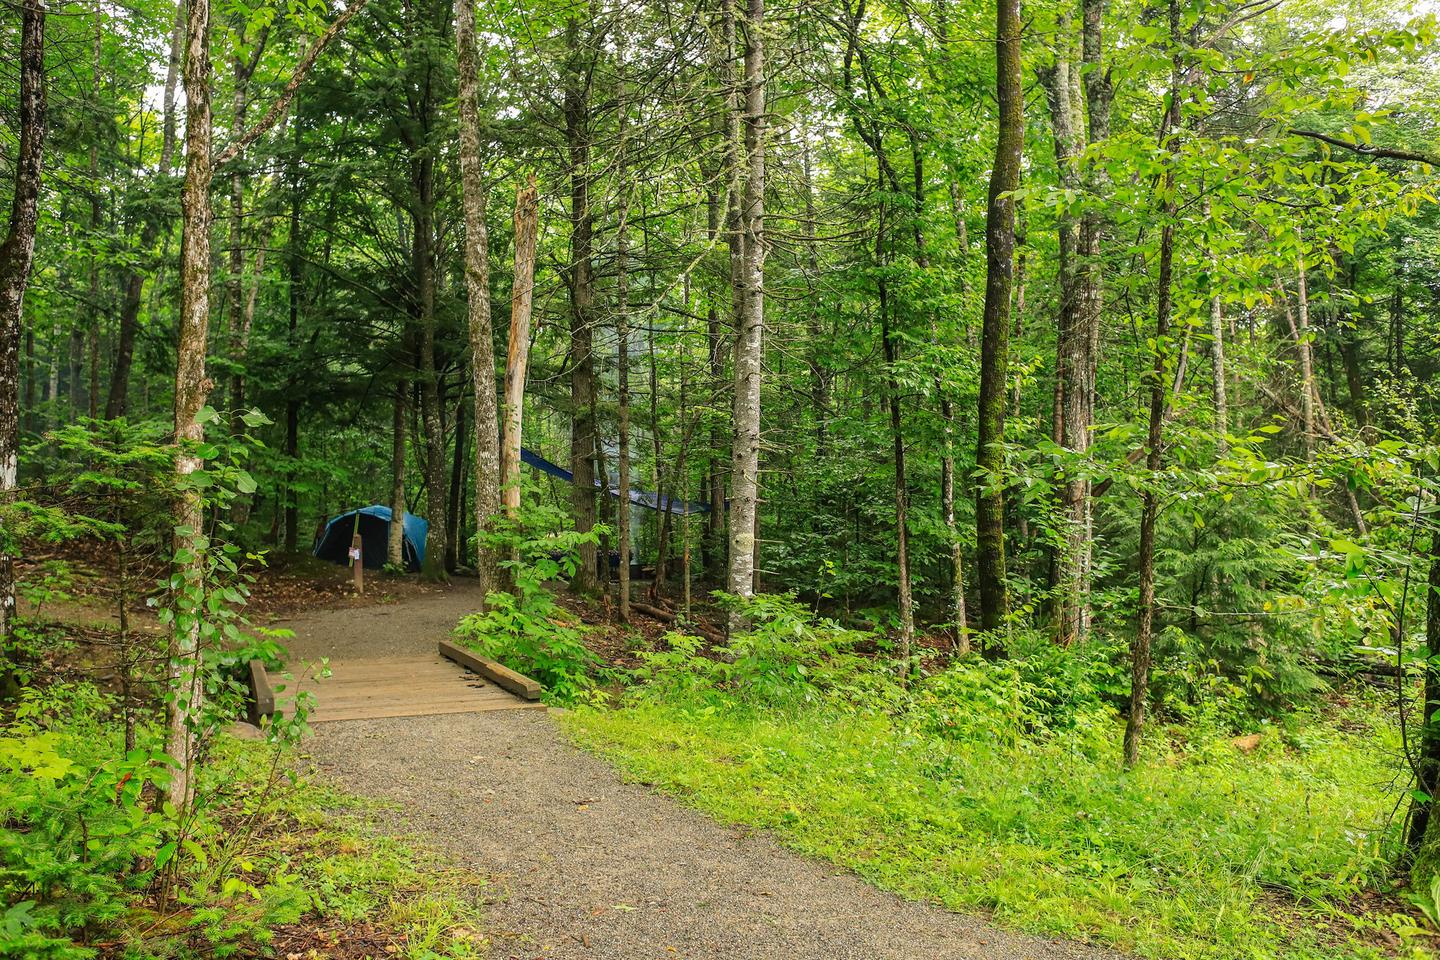 A level gravel path and wooden footbridge lead to campsite 1. A blue tent in the campsite is visible from the gravel path.Campsite 1 is the first to the right after you cross the small wooden bridge.